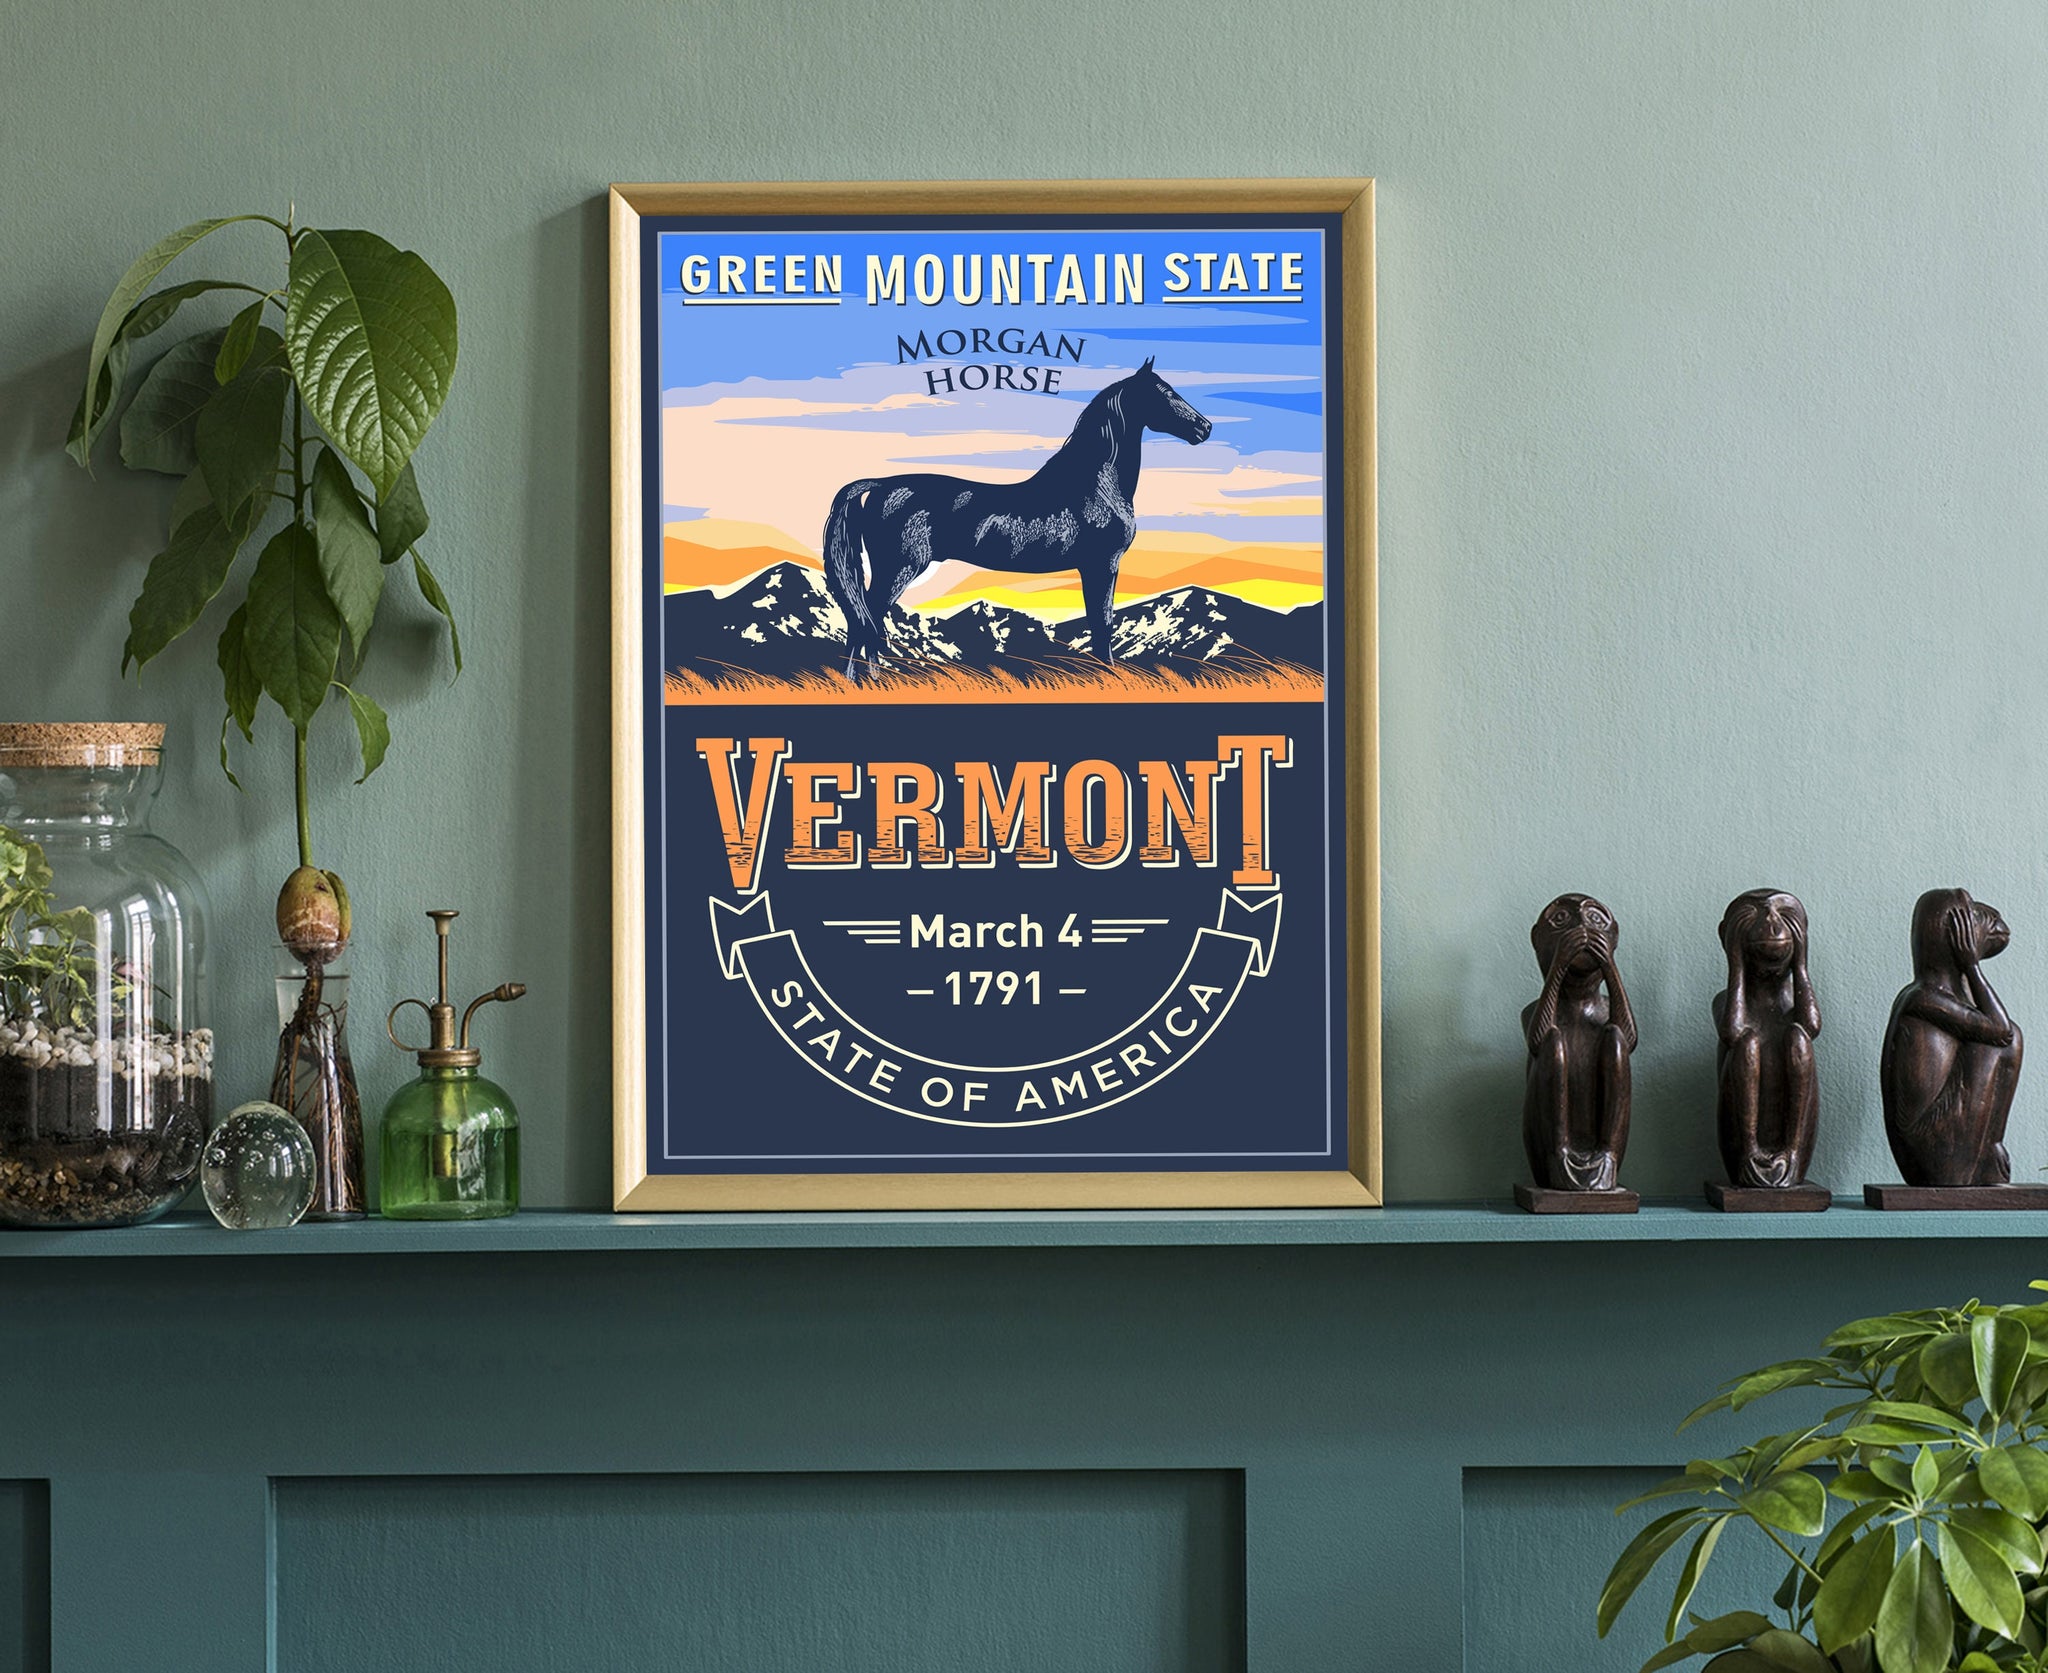 United States Poster, Vermont State Poster Print, Vermont State Emblem Poster, Retro Travel State Poster, Home Wall Art, Office Wall Art